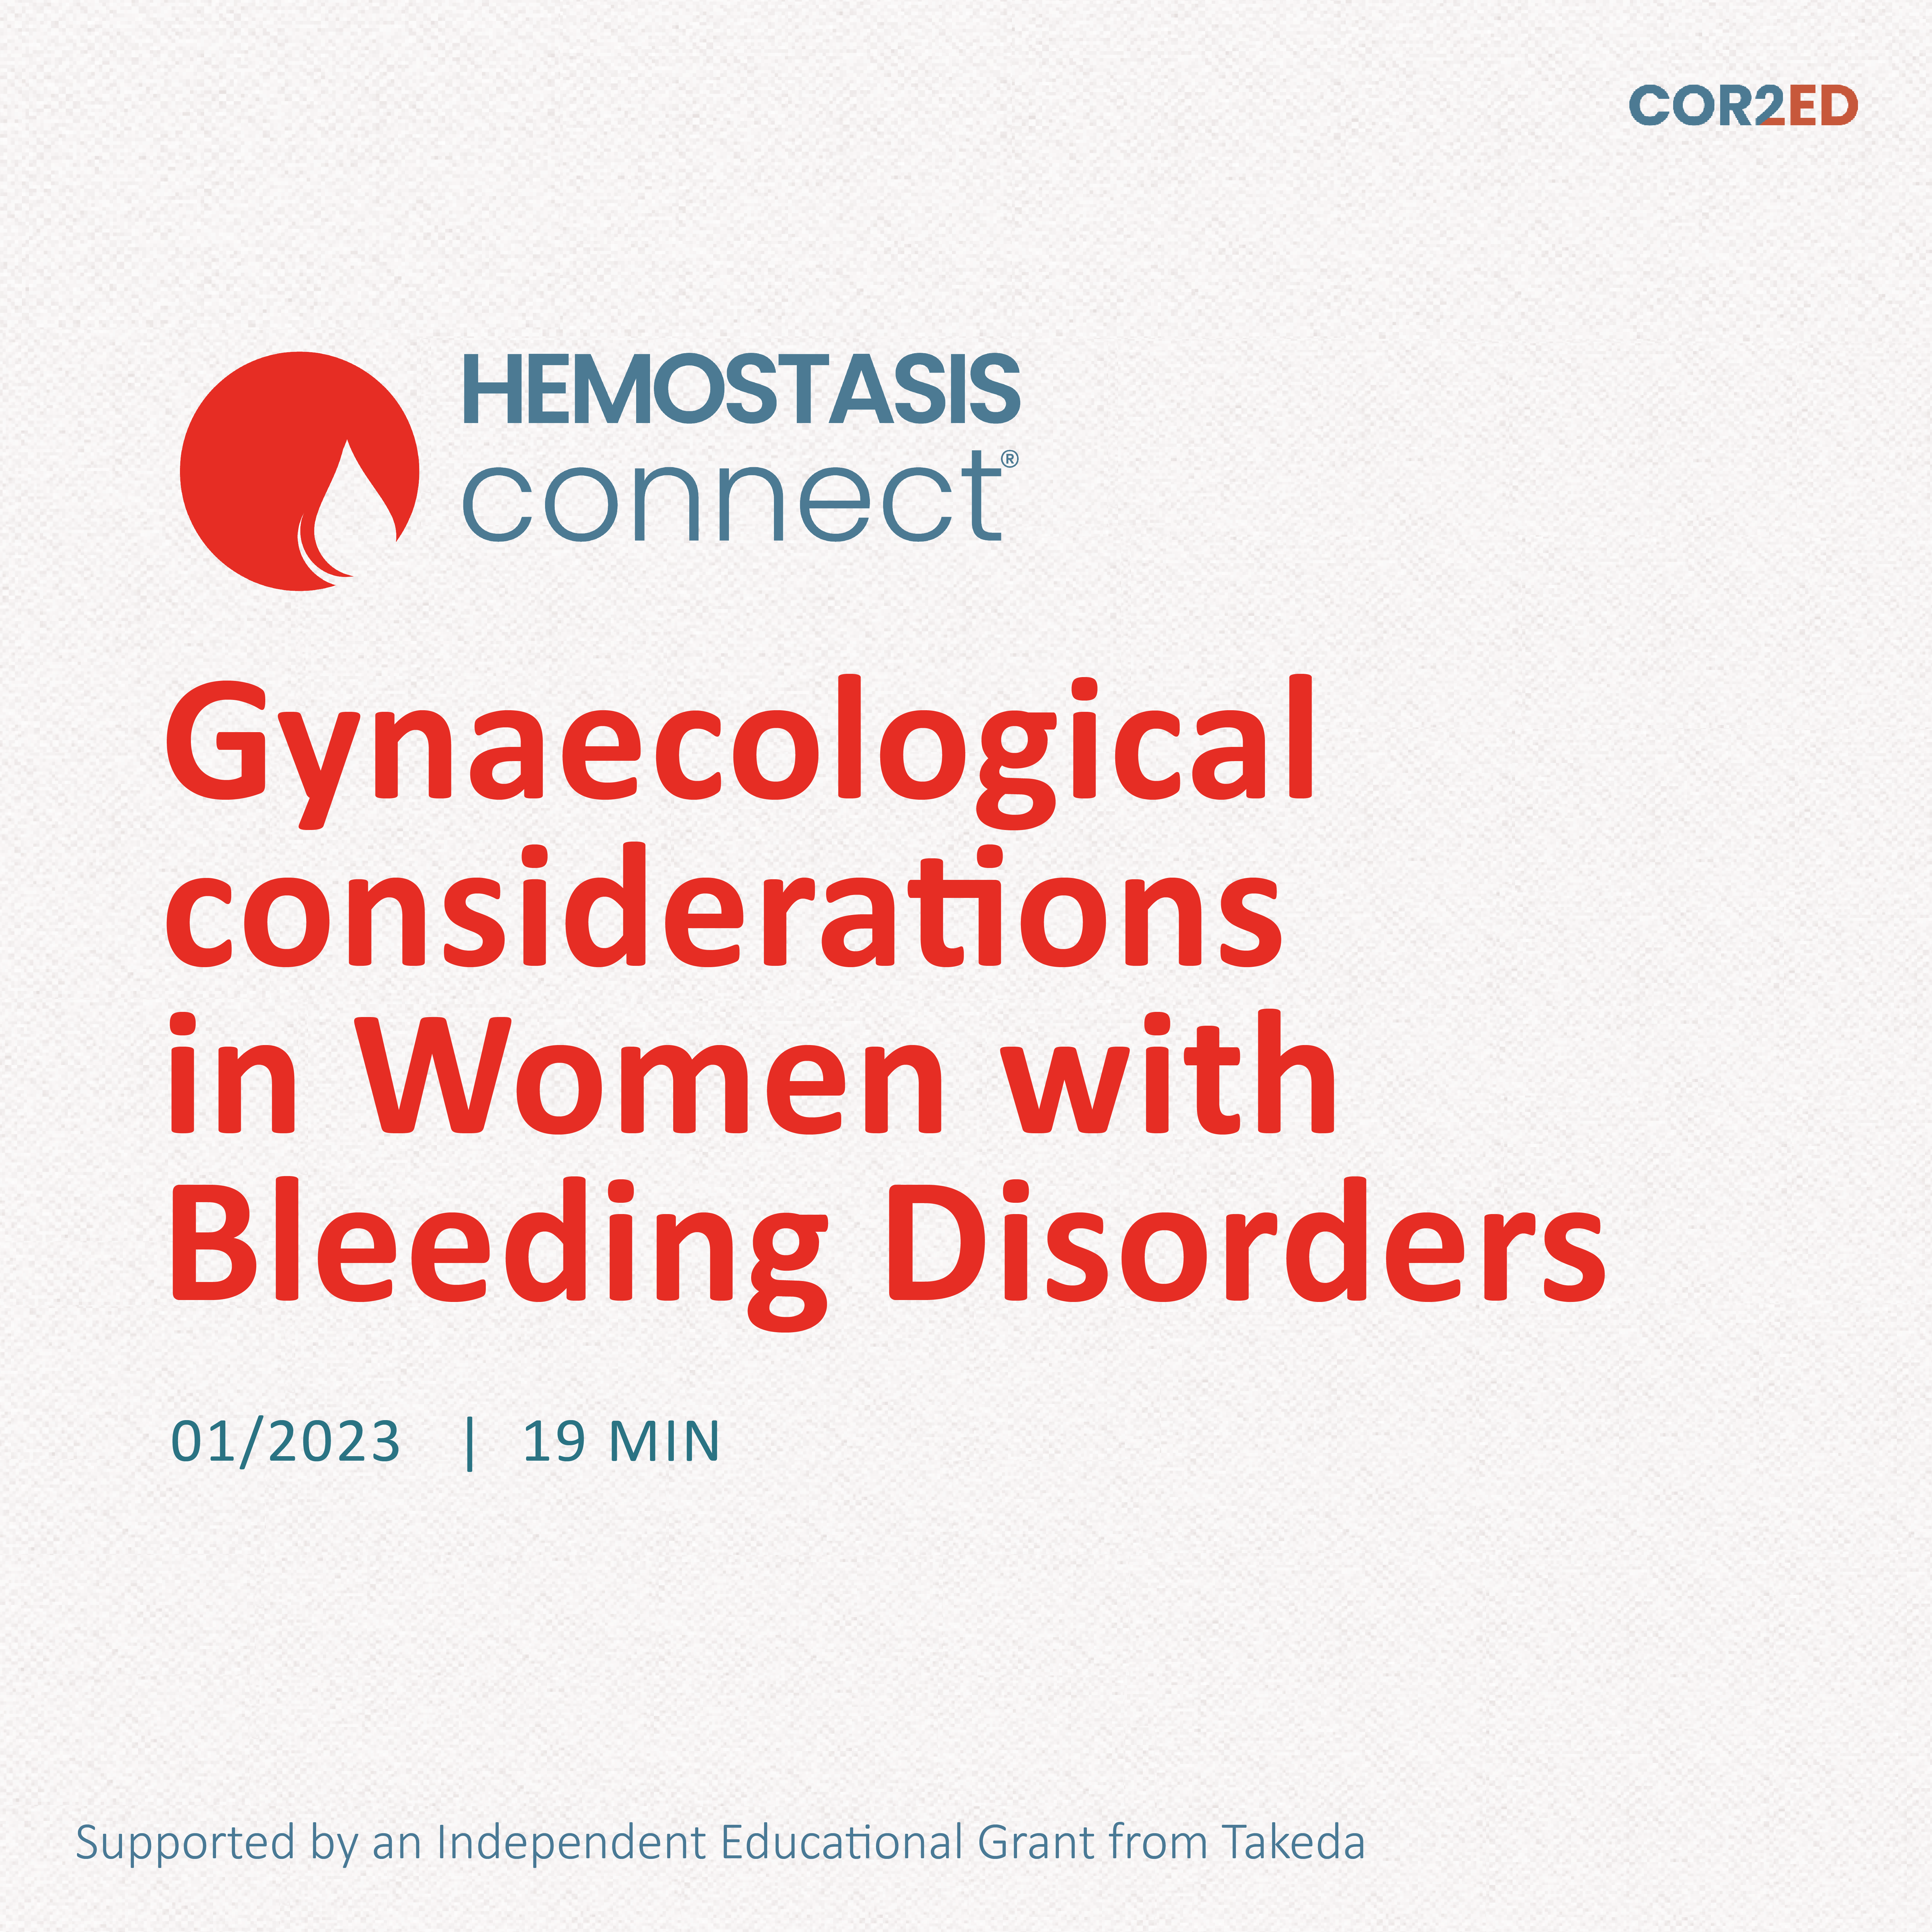 Gynaecological considerations in Women with Bleeding Disorders